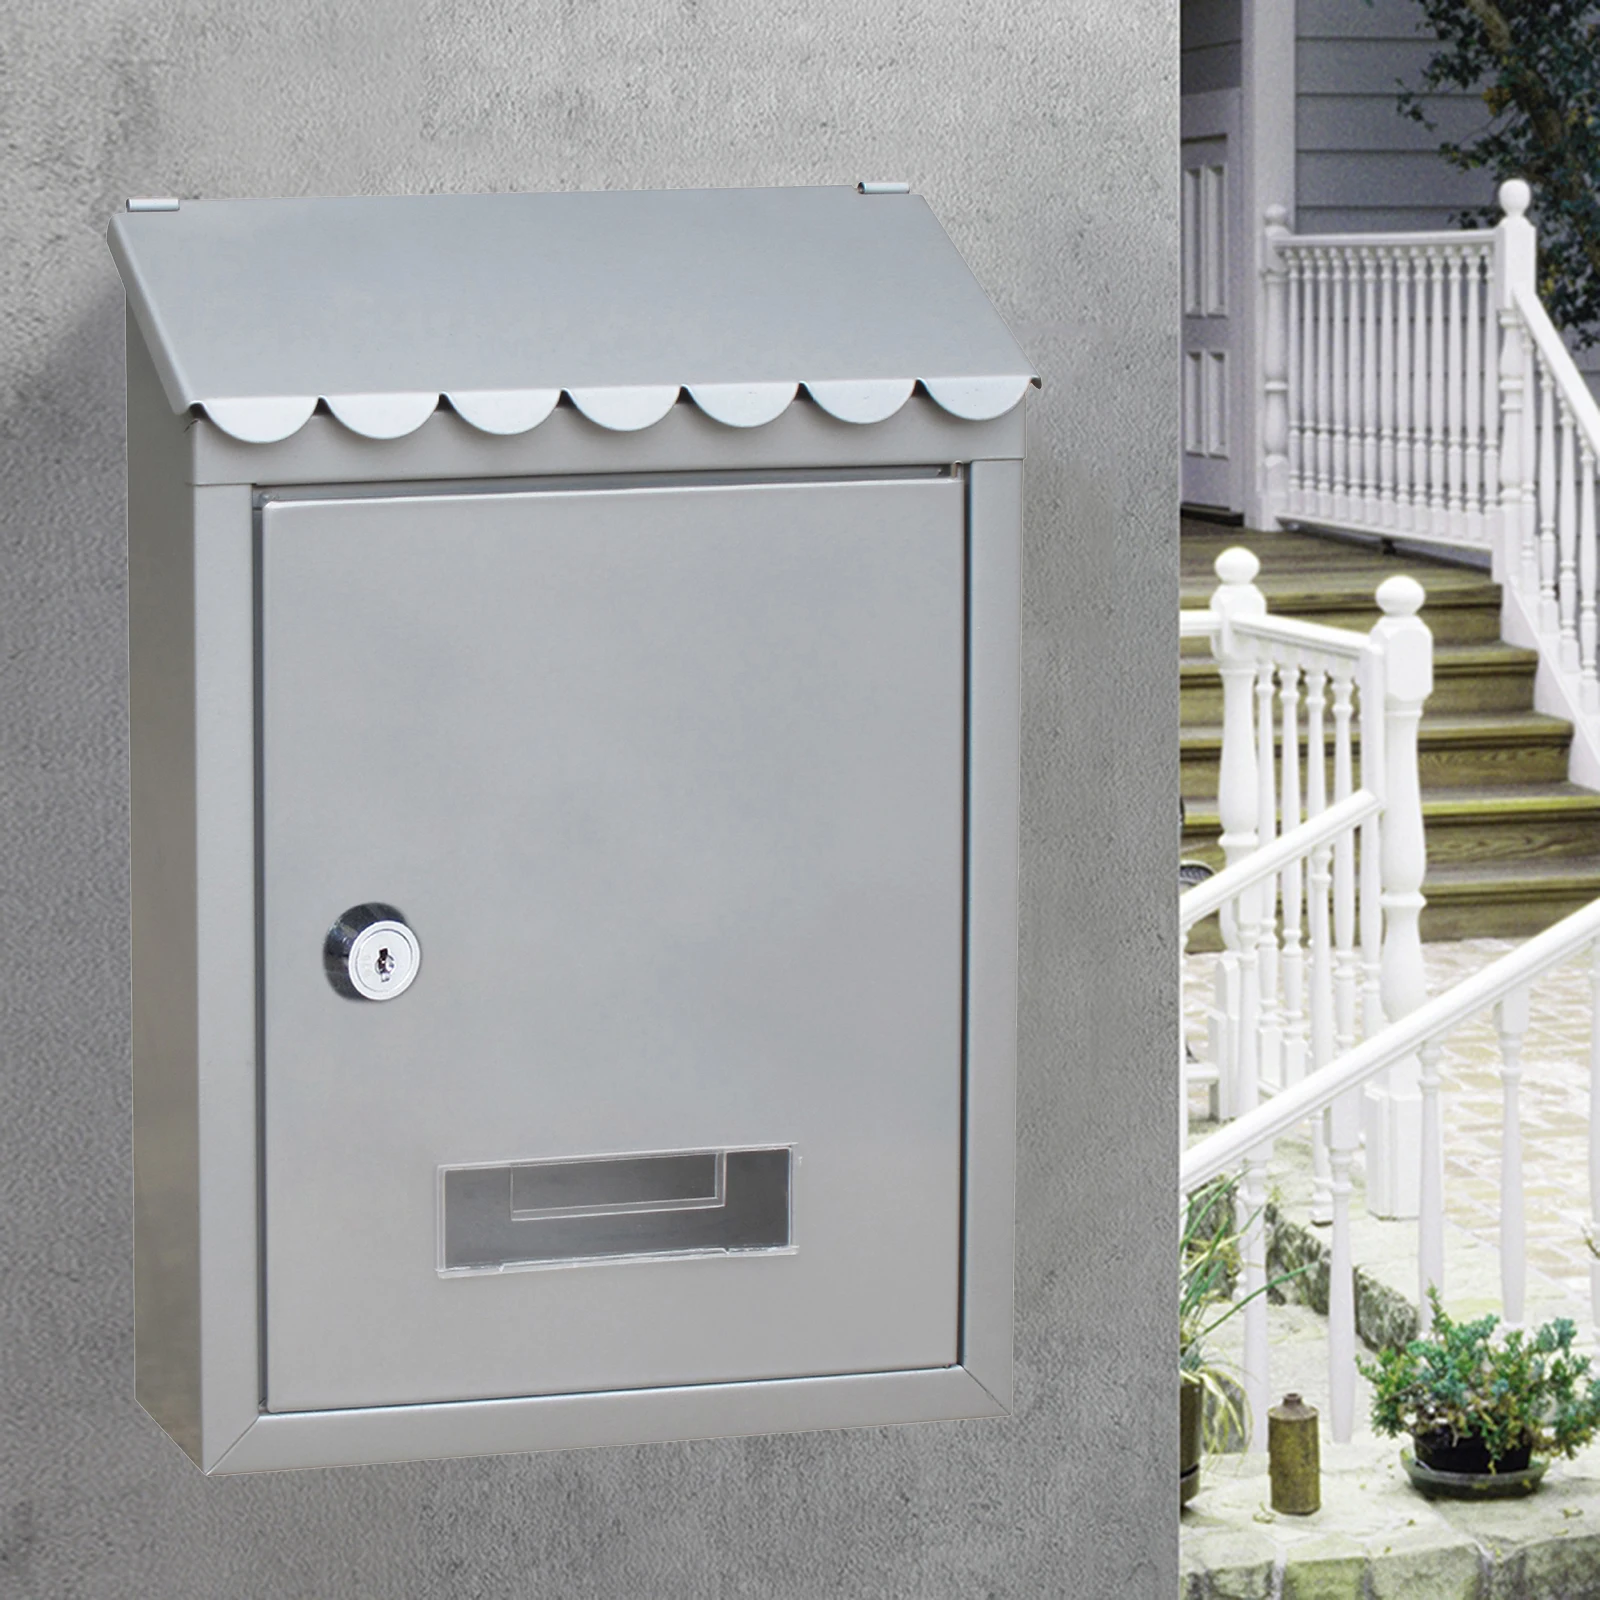 Outdoor Lockable Metal Mailboxes Wall Mounted Mail Box Bucket Post Letter Boxwith Key For Home Garden Decoration Garden Supplies images - 6